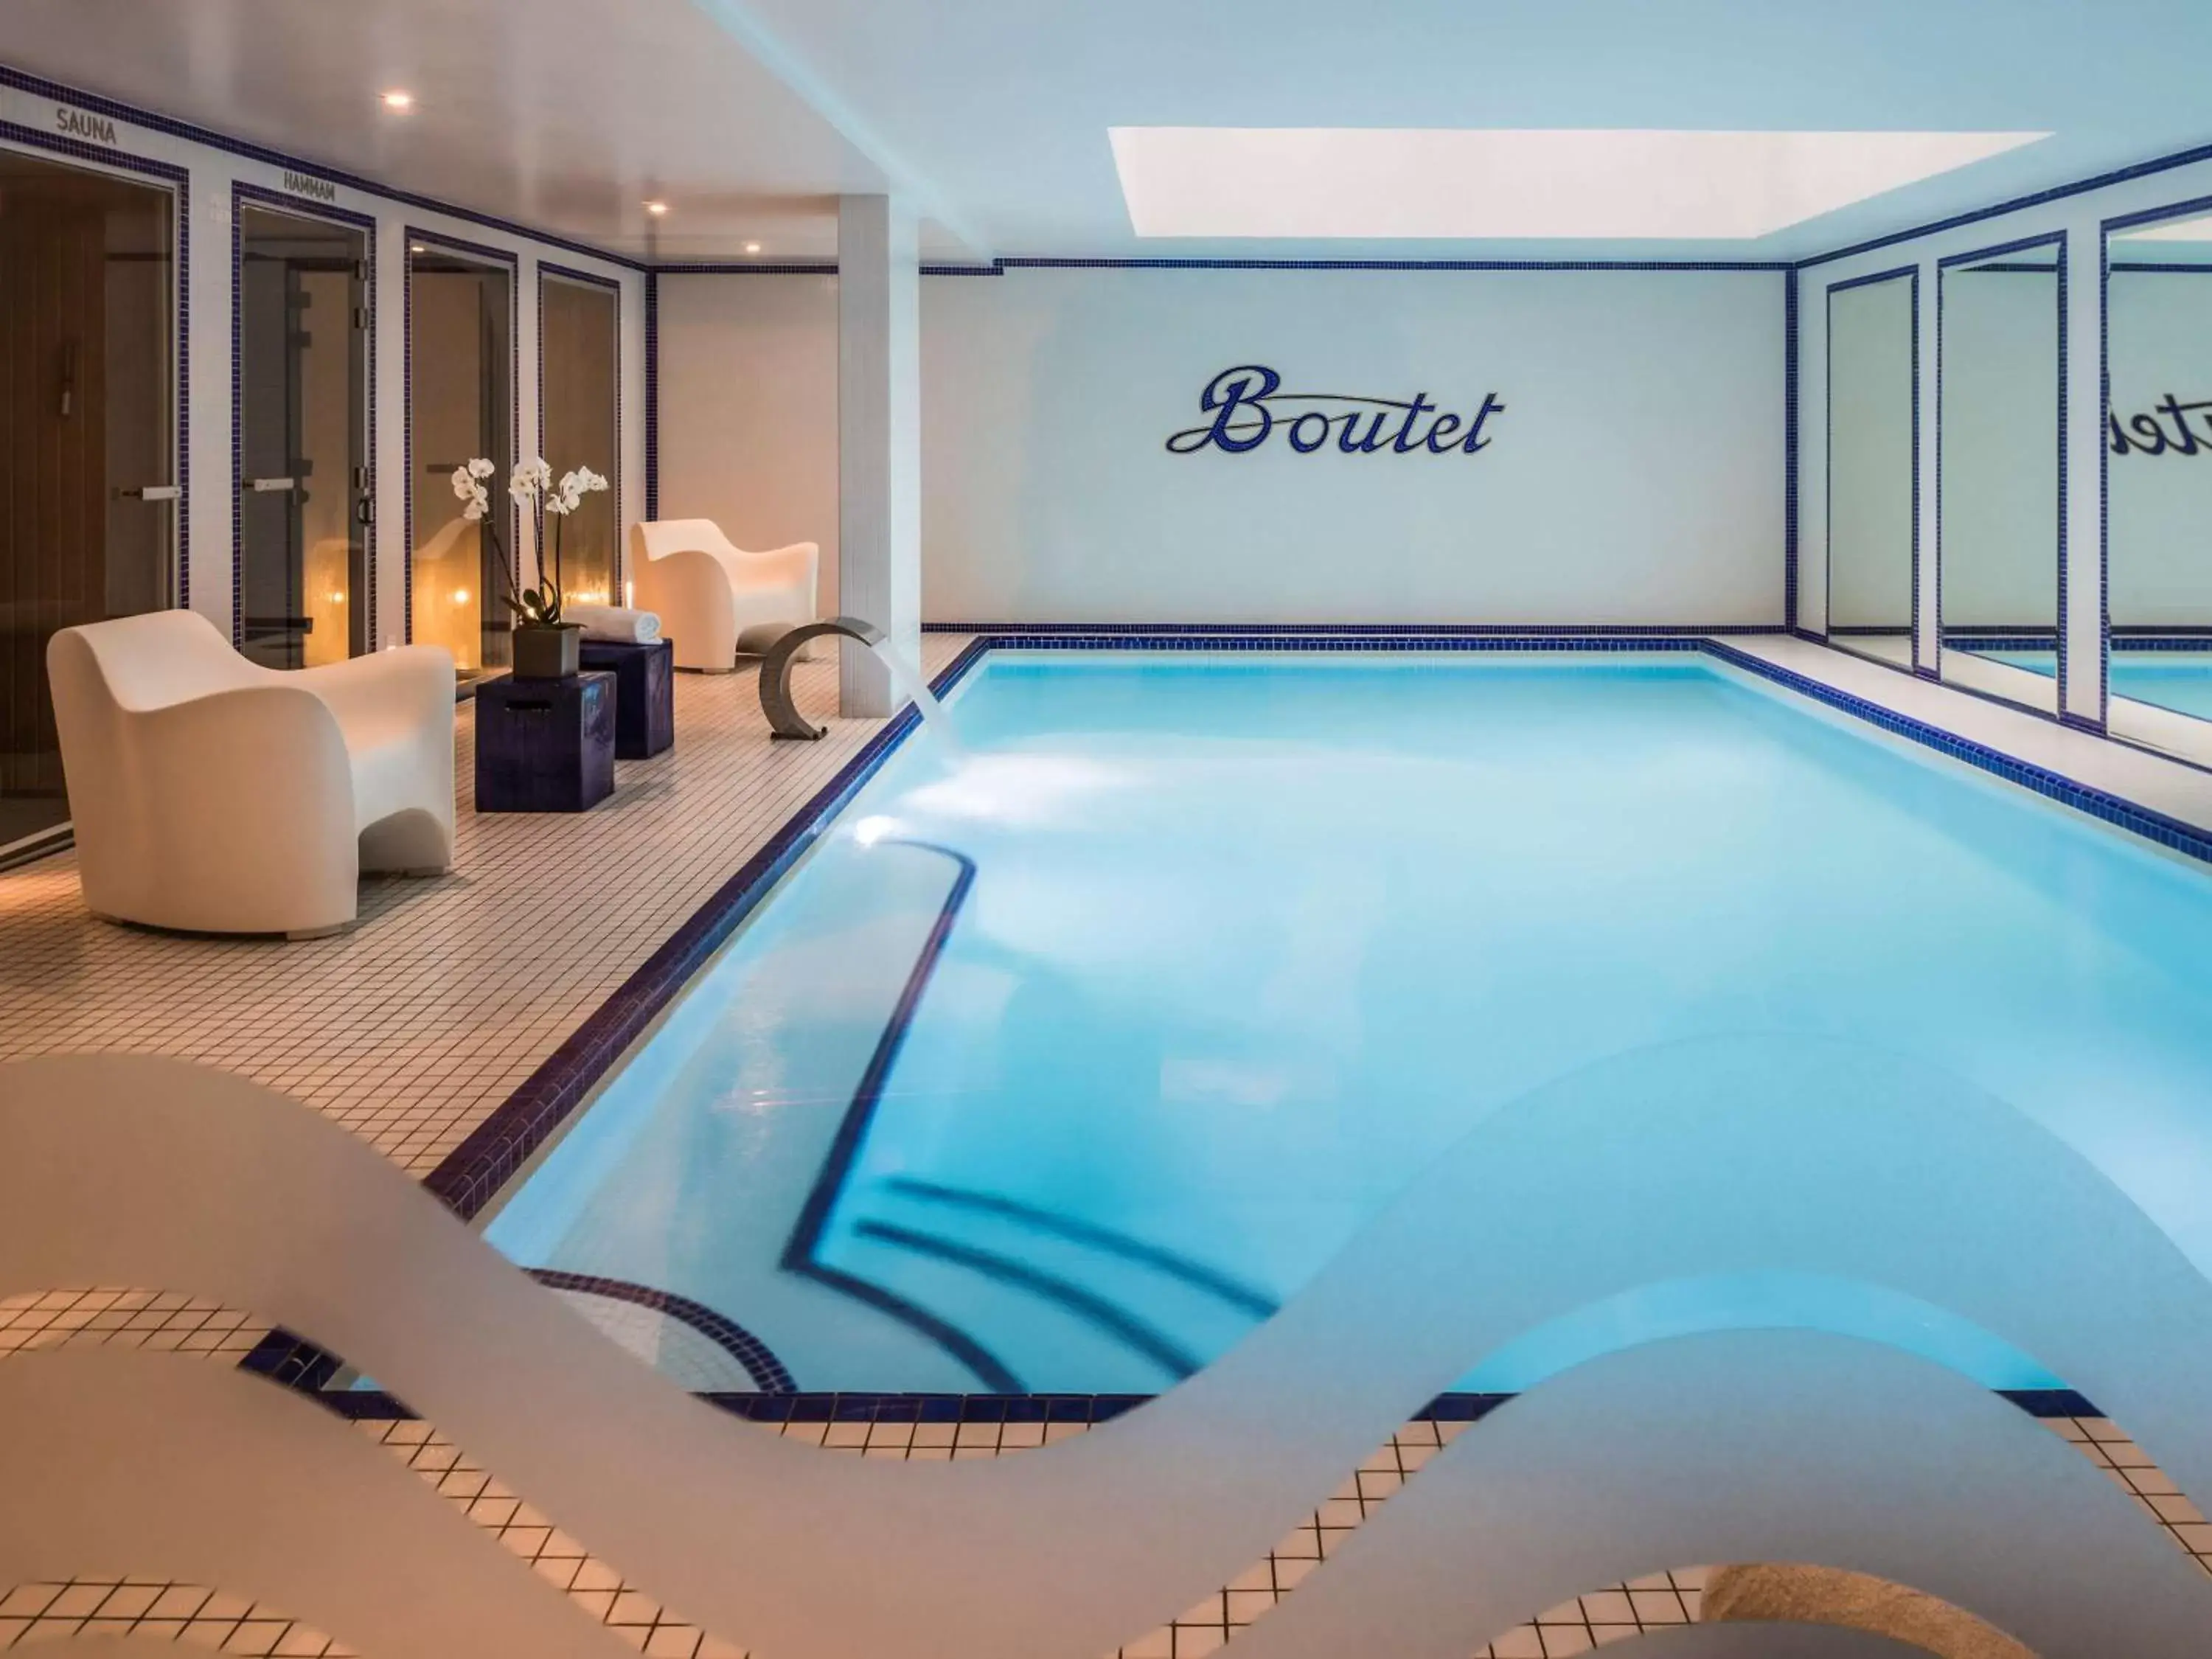 Property building, Swimming Pool in Hotel Paris Bastille Boutet - MGallery by Sofitel